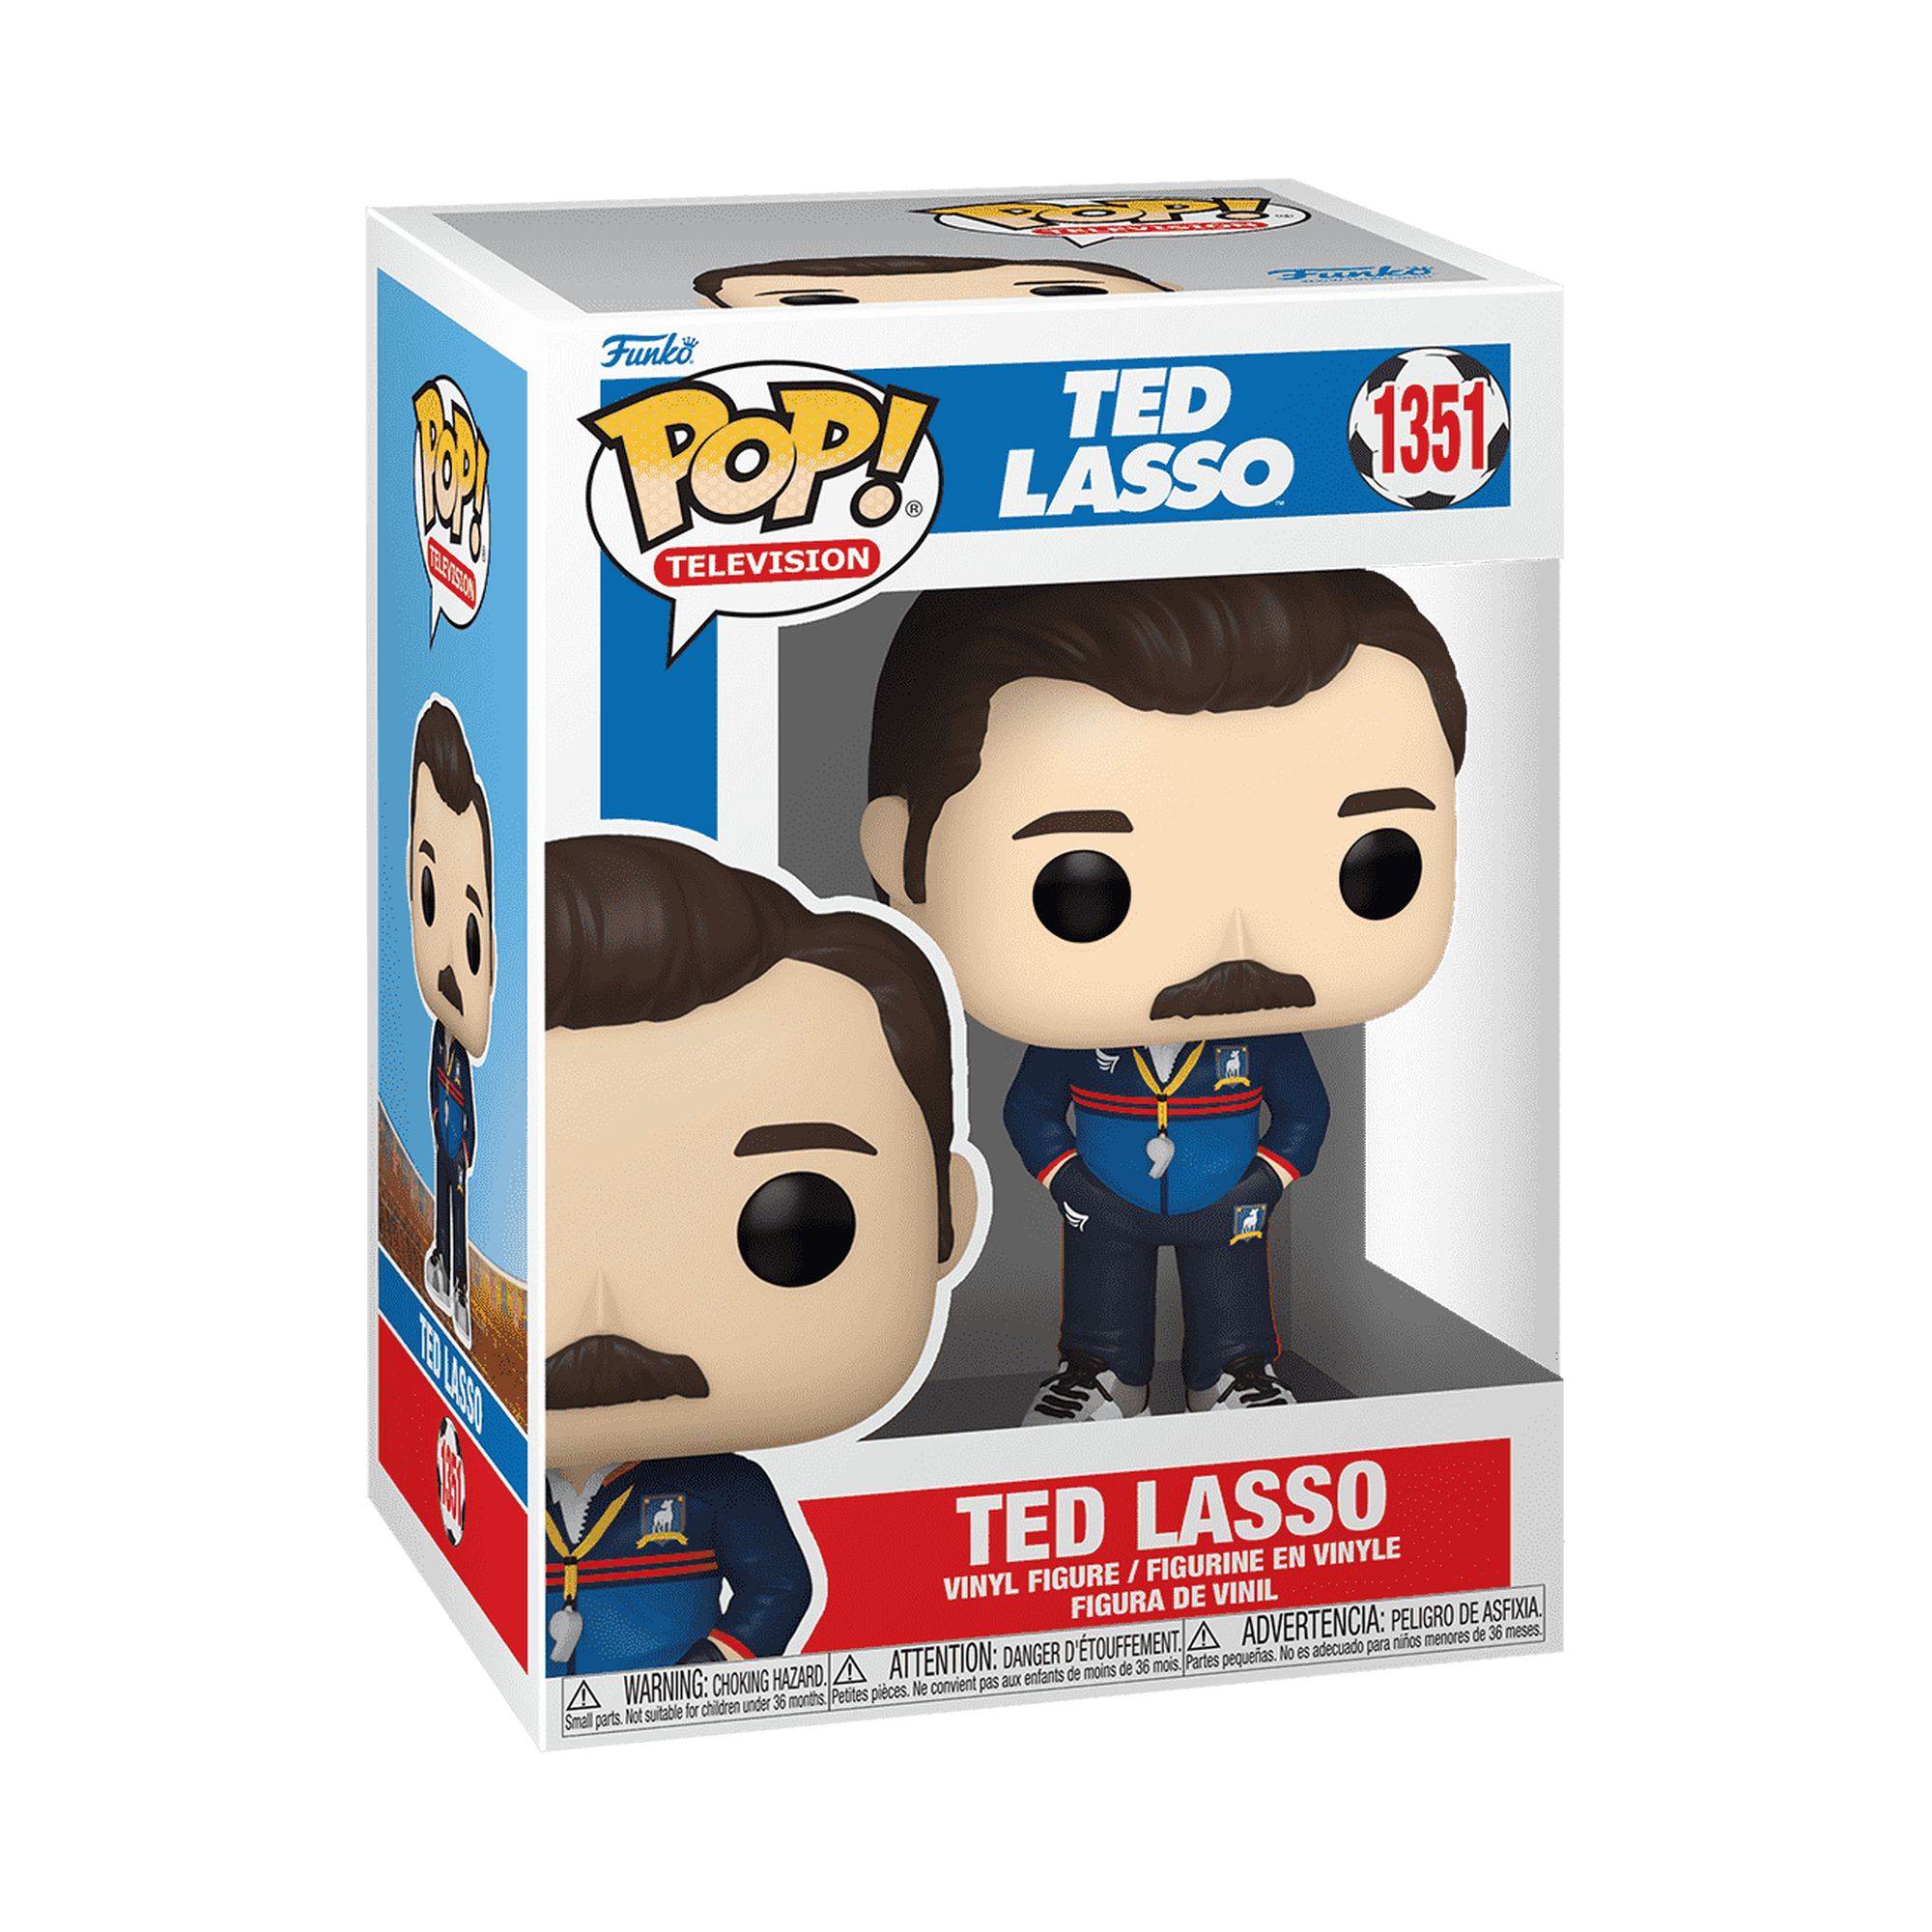 Ted (Ted Lasso) Funko Pop!